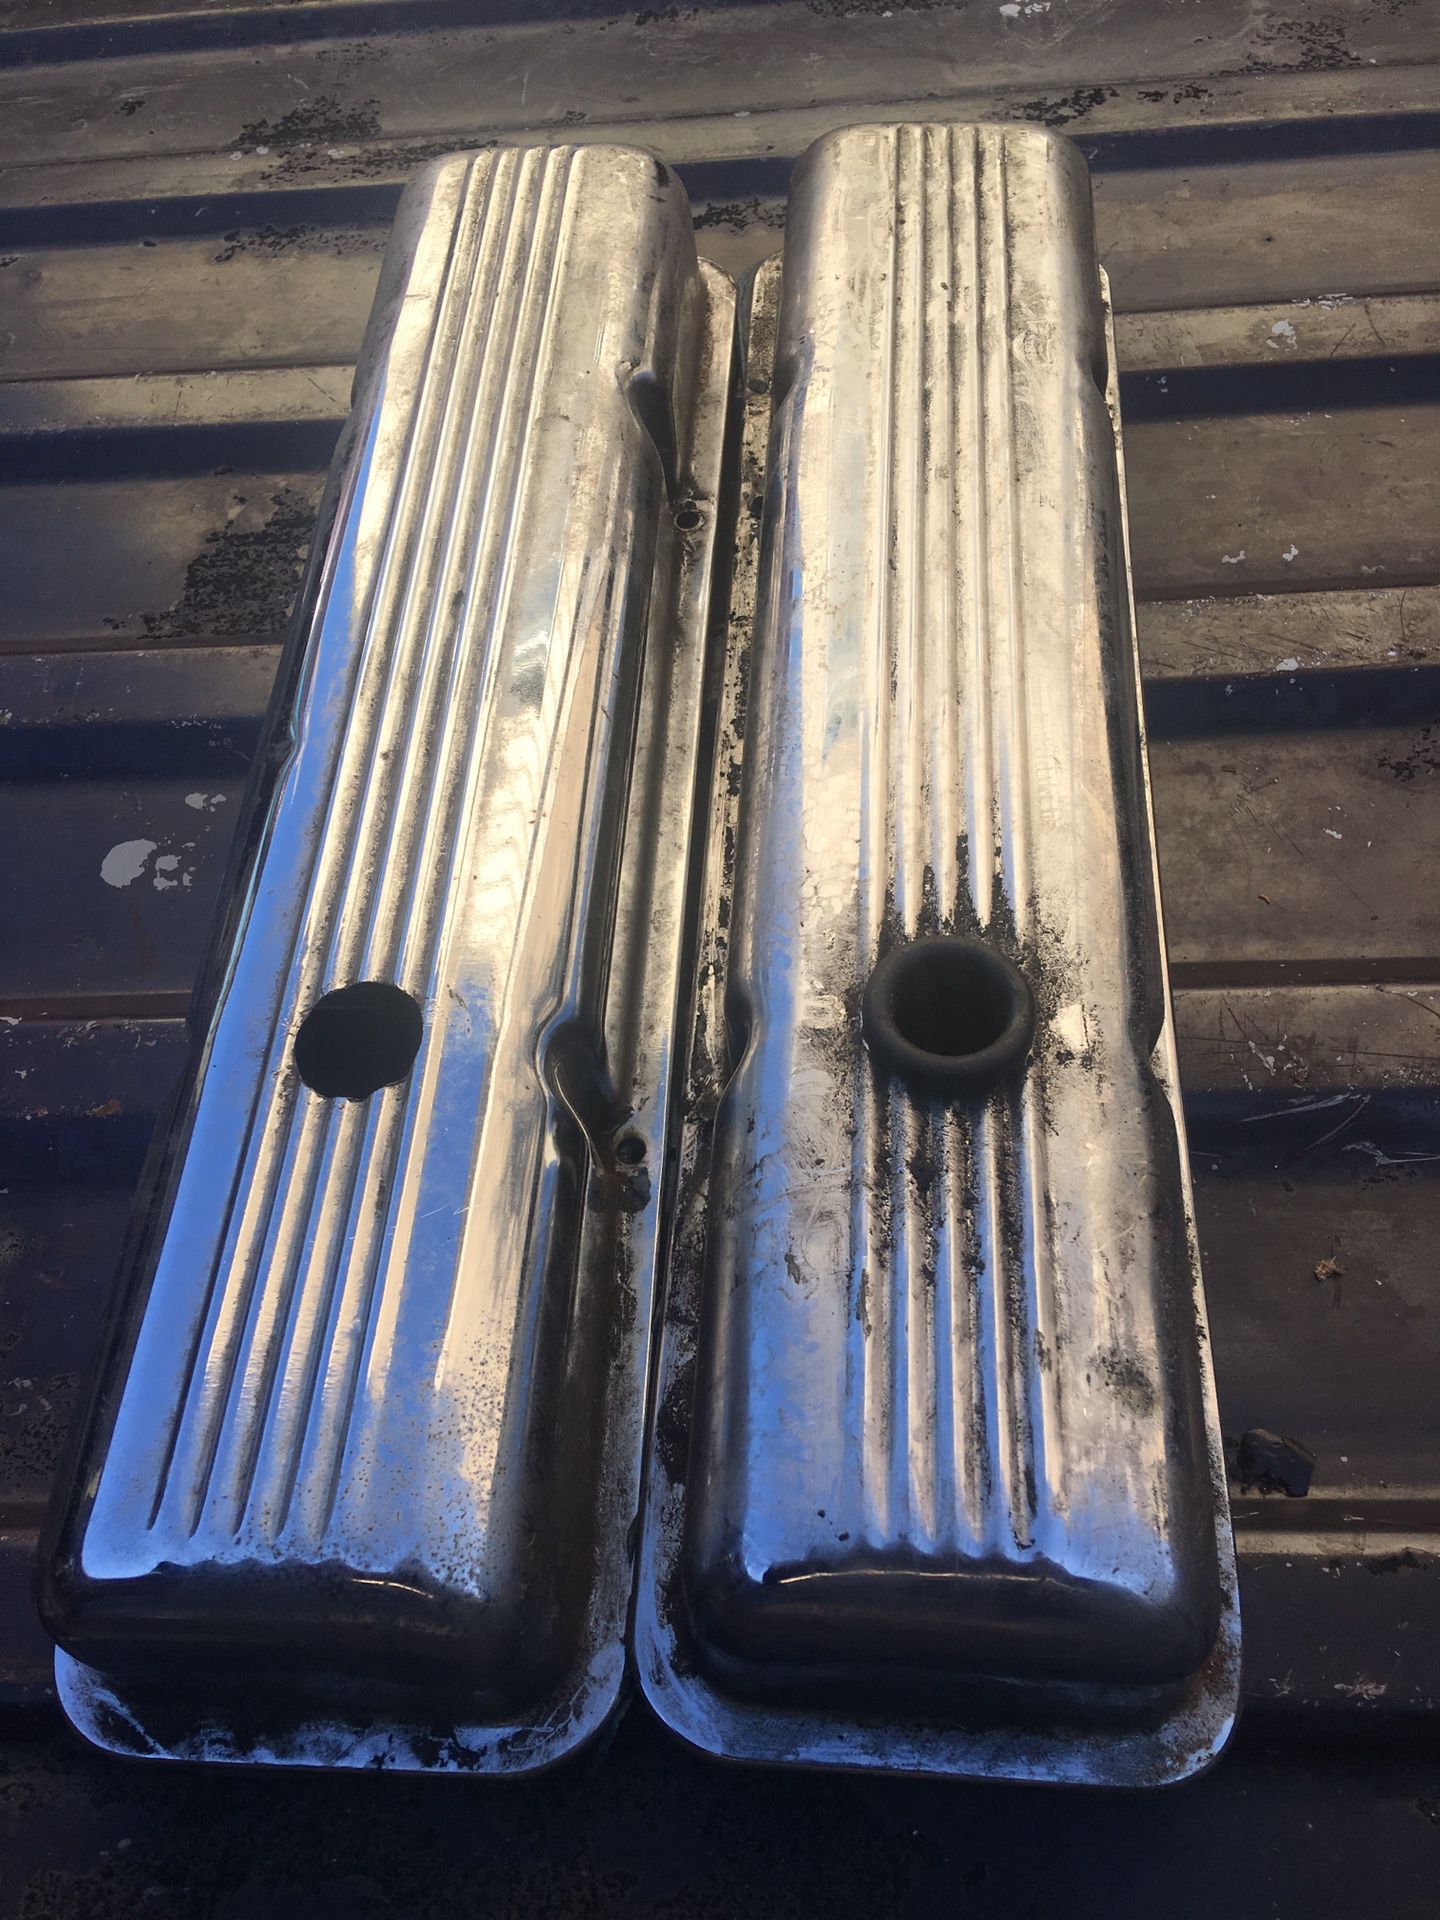 SMALL BLOCK CHEVY CHROME VALVE COVERS NEEDS TO BE CLEAN UP $40.00